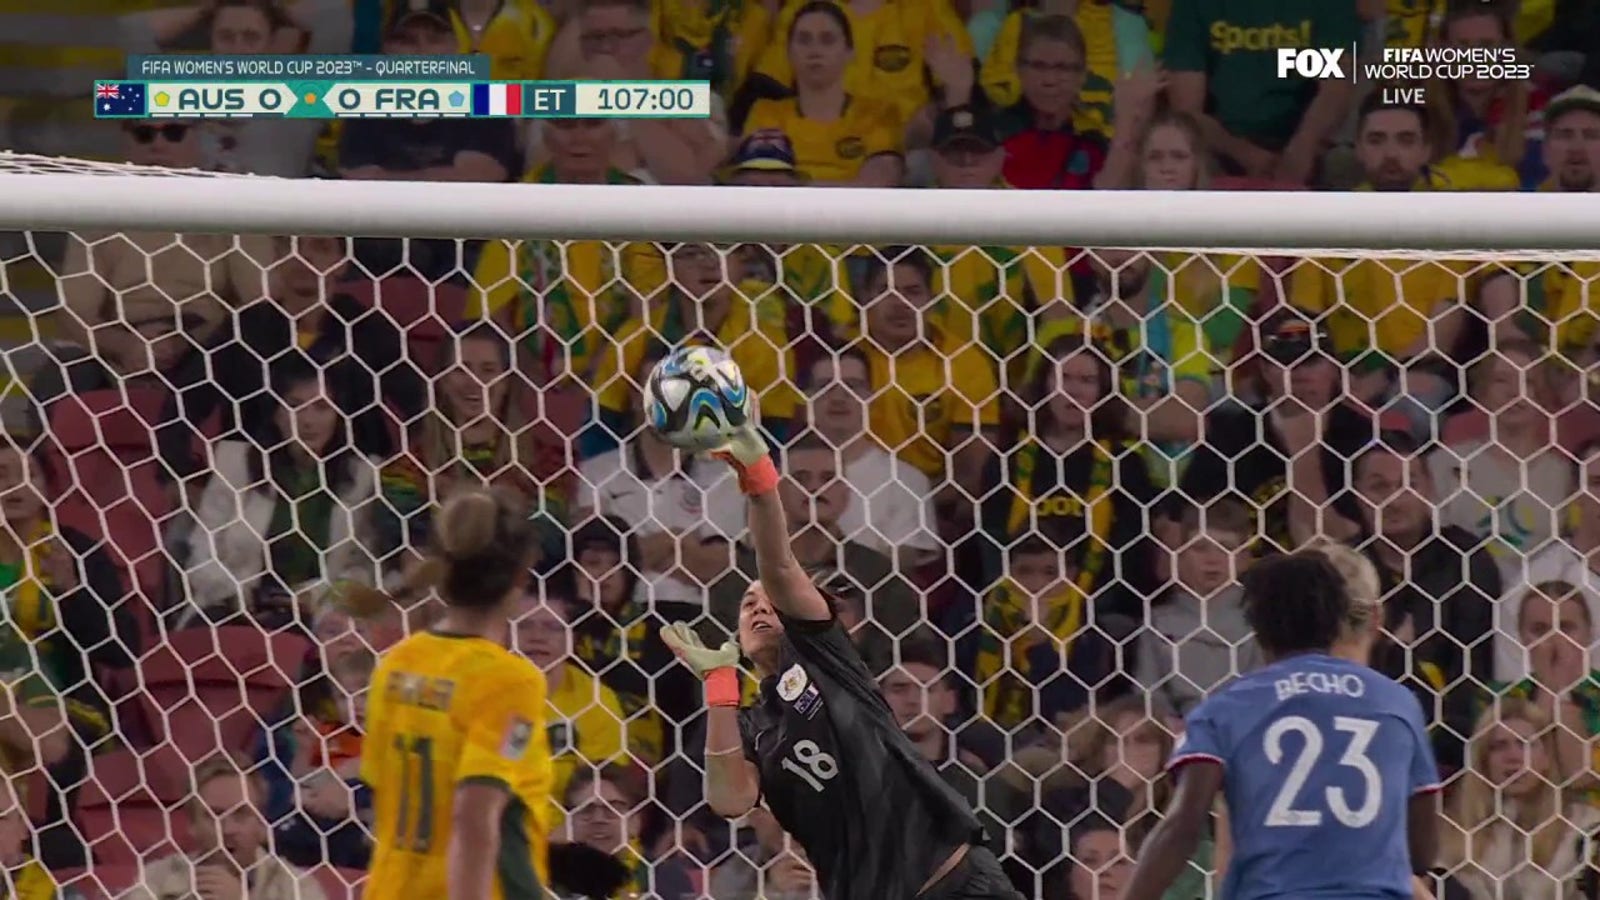 Mackenzie Arnold saves again to keep Australia and France deadlocked 0-0 in extra time